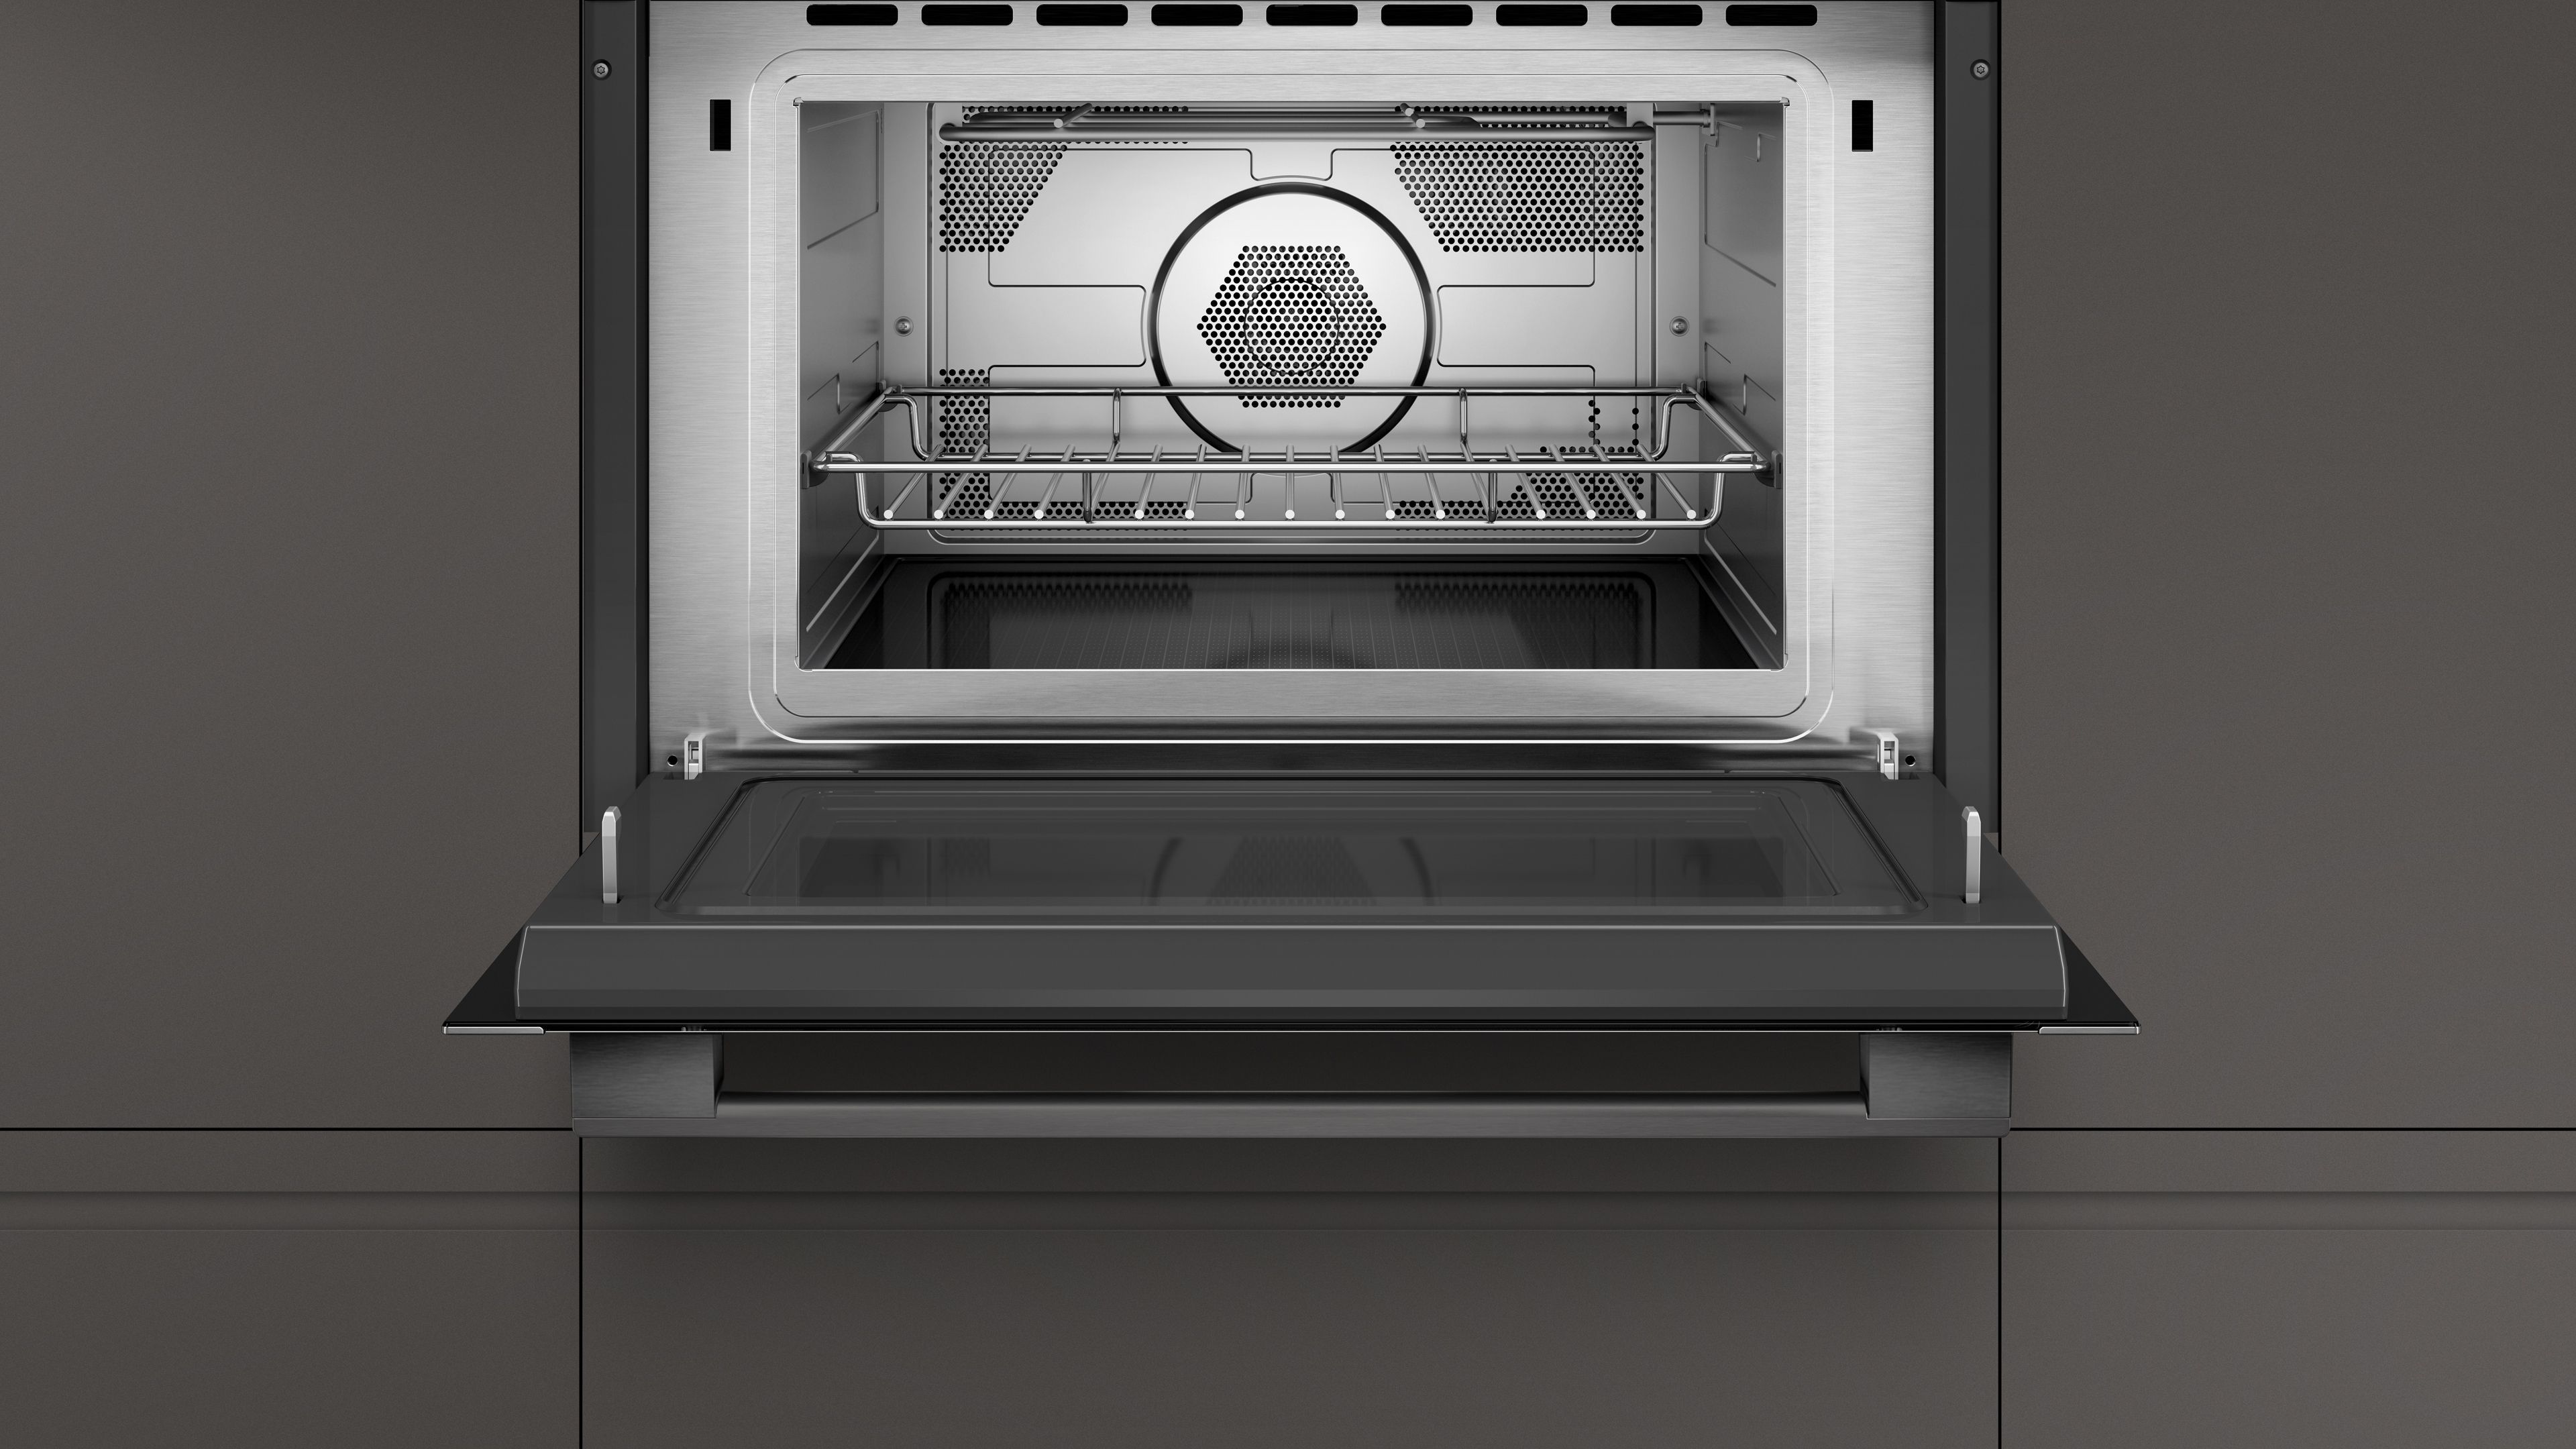 Neff C1AMG84G0B Built-in Combination microwave - Black & graphite